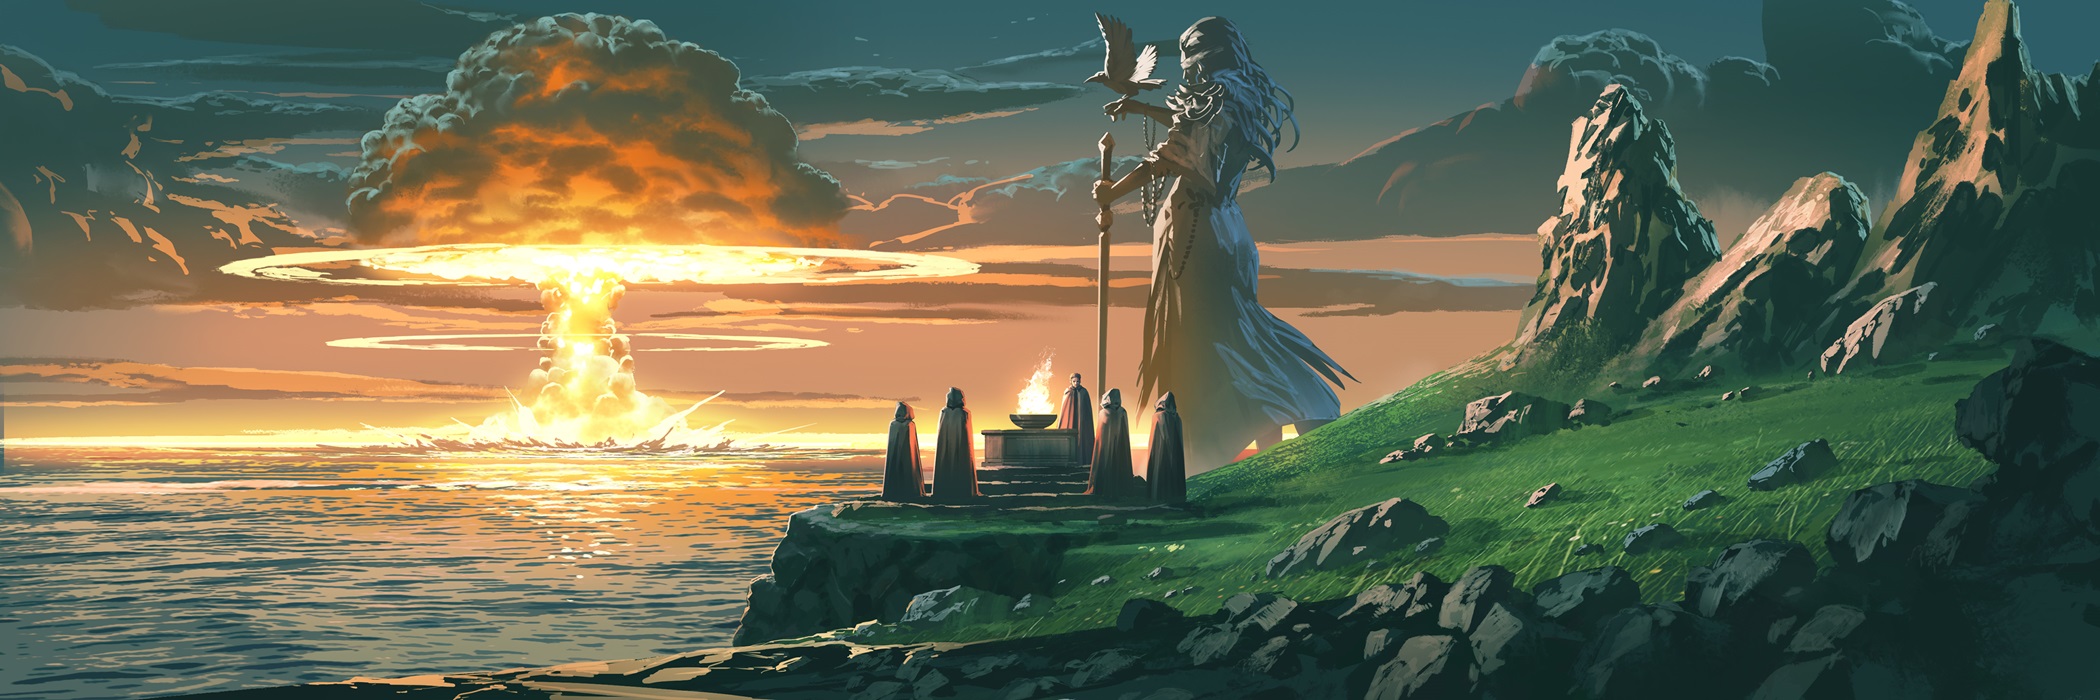 Black-robed figures gather around a fiery altar, conducting a ritual before the statue of an awe-inspiring goddess, on an island graced with verdant hills. In the sea beyond, a colossal explosion breaks the surface, contrasting the serenity of the island with a distant turmoil.